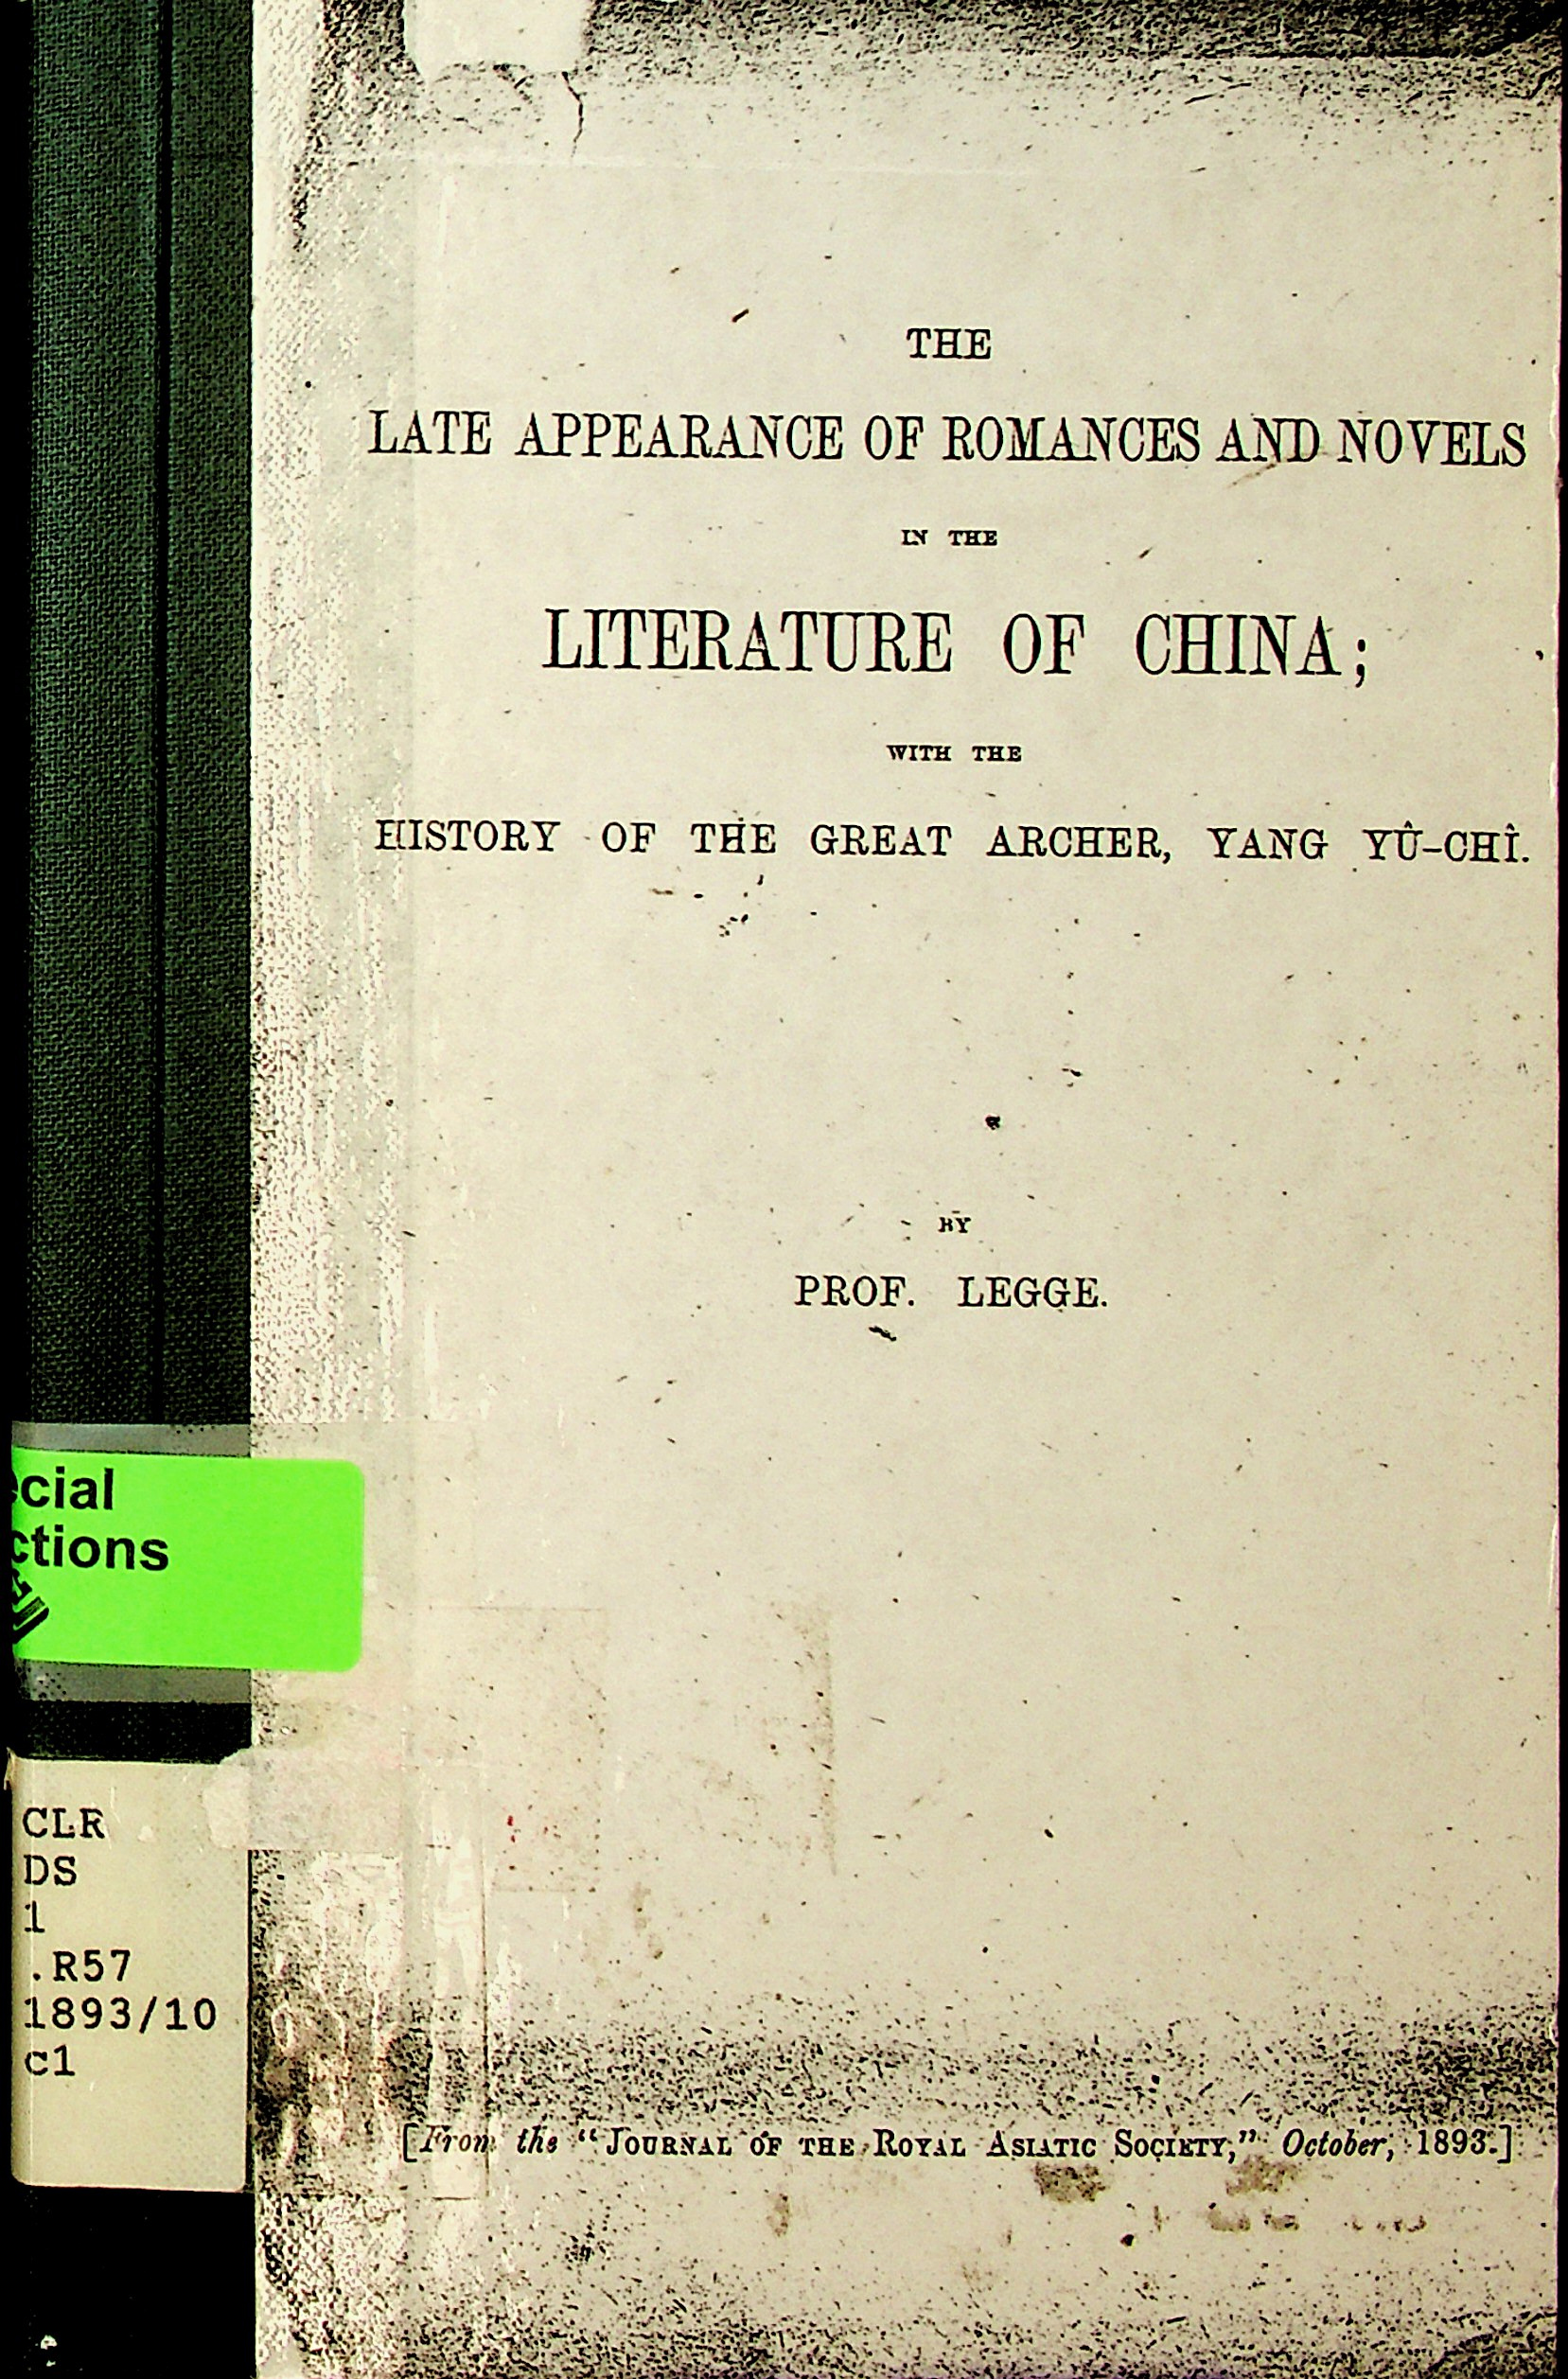 The late appearance of romances and novels in the literature of China : with the history of the great archer, Yang Yu Chi